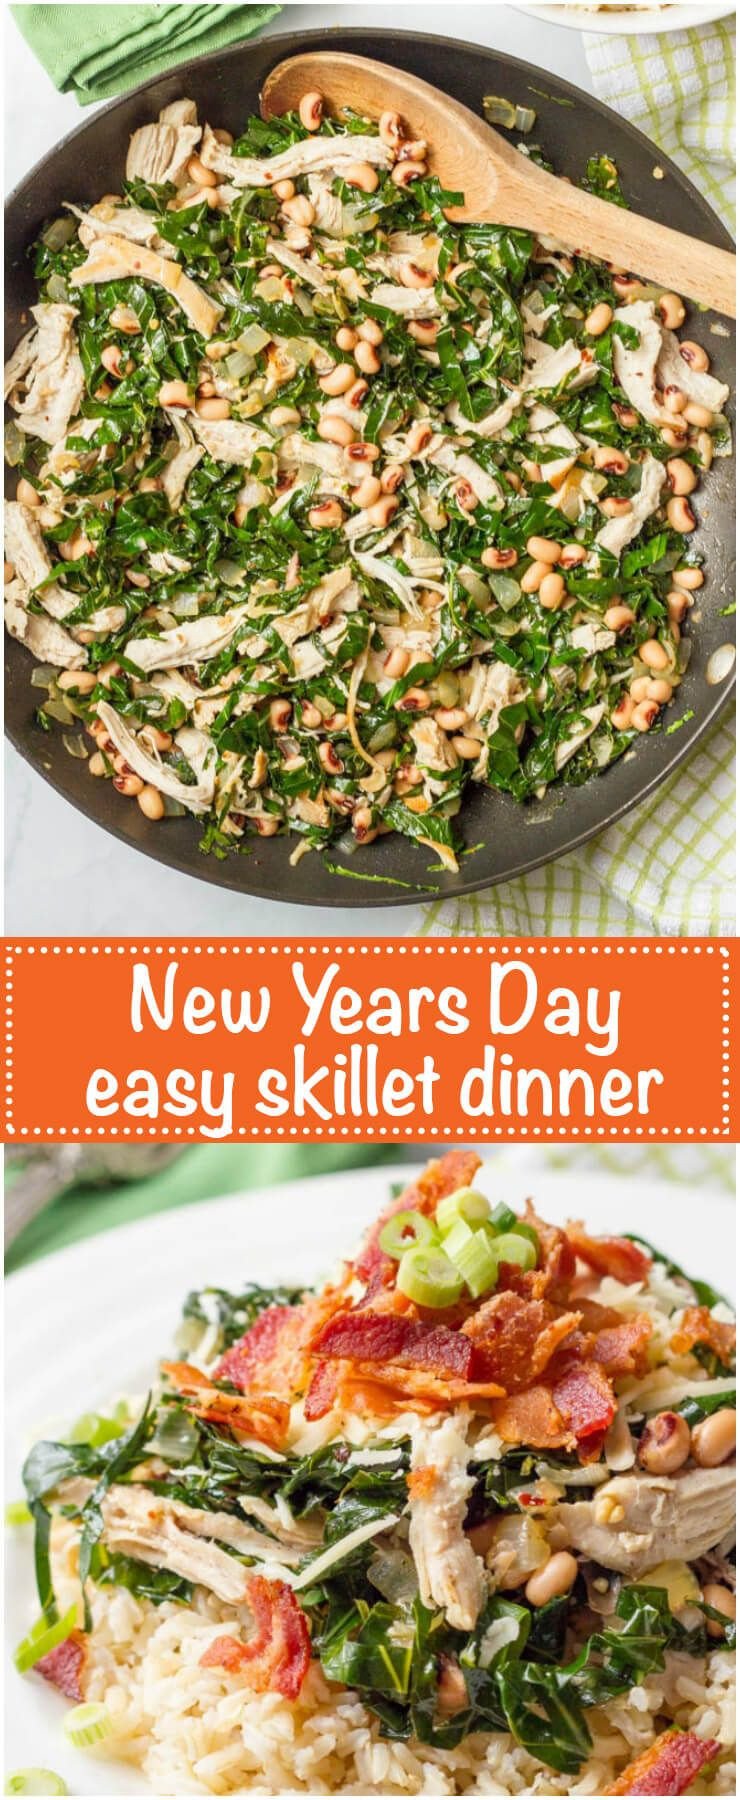 New Year Dinner Ideas
 Southern New Year s Day dinner skillet Recipe